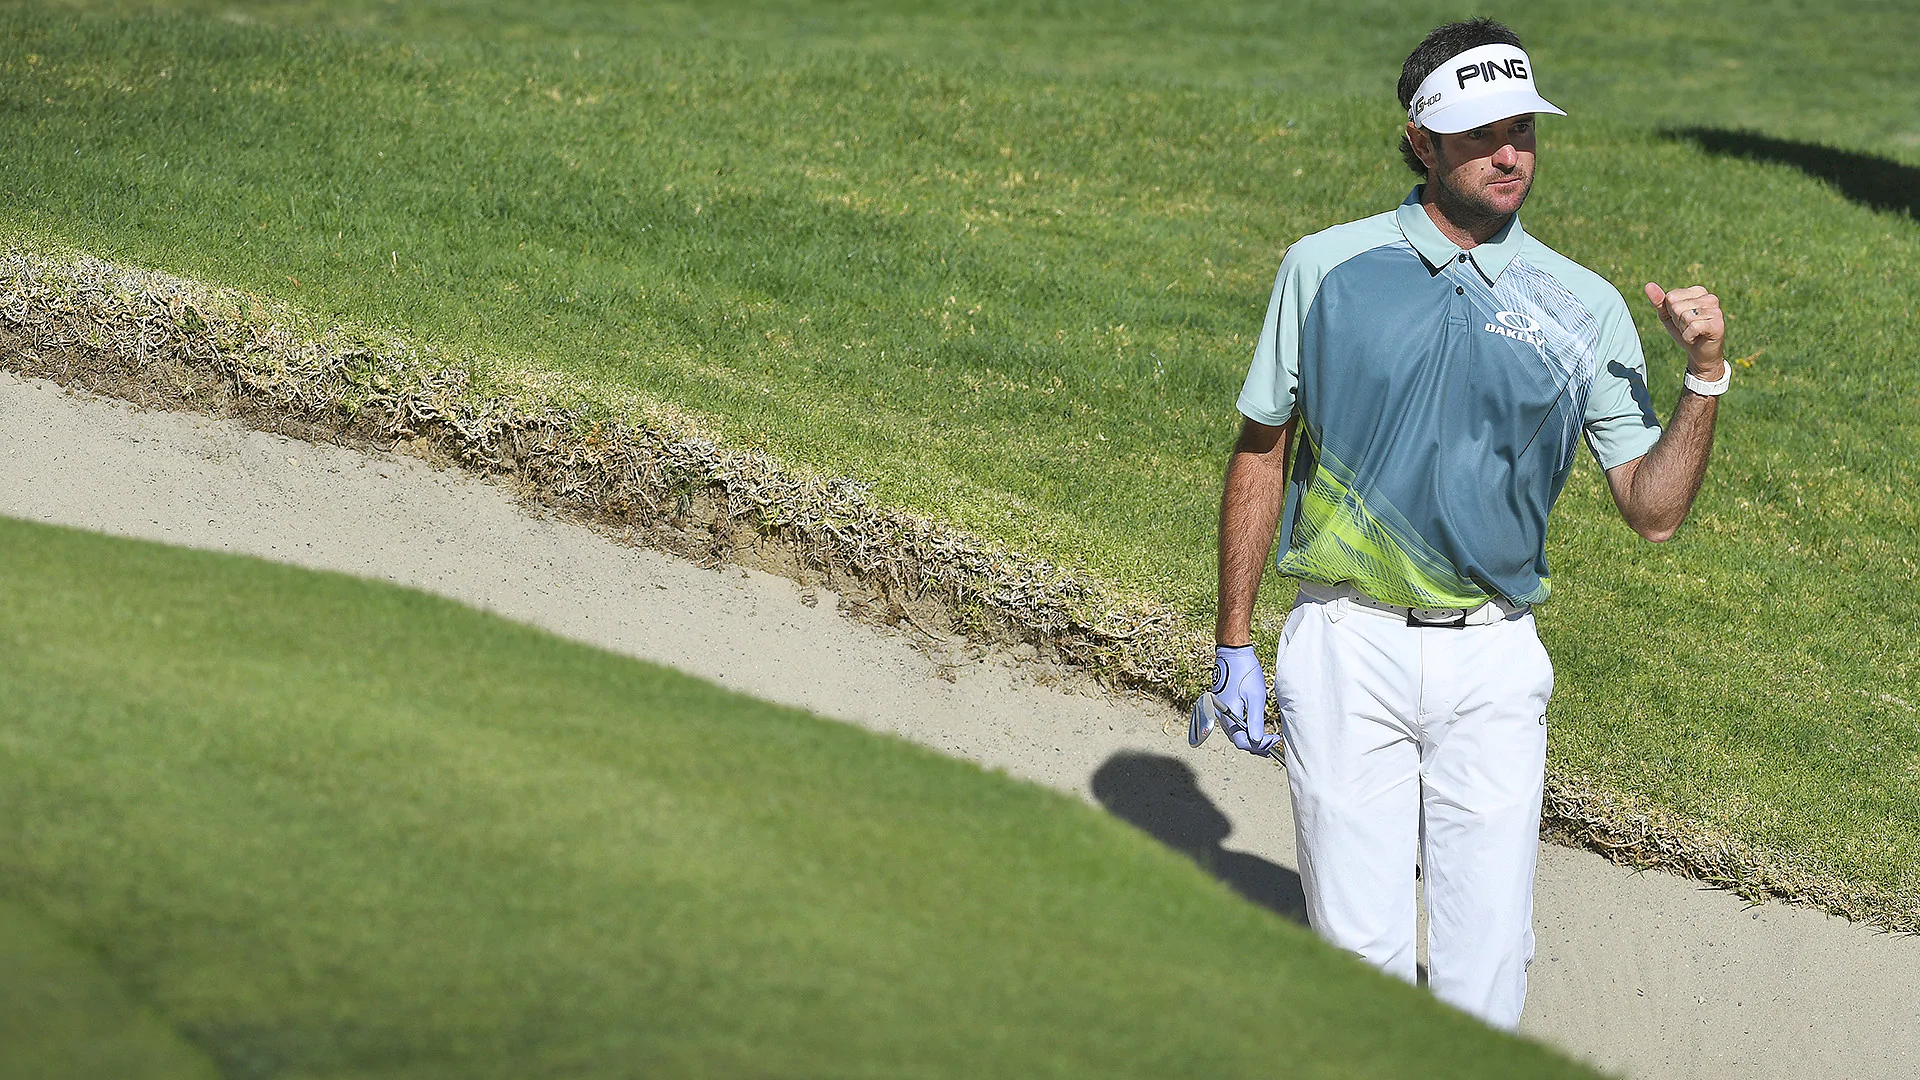 Bubba holes birdie from bunker after caddie calls it